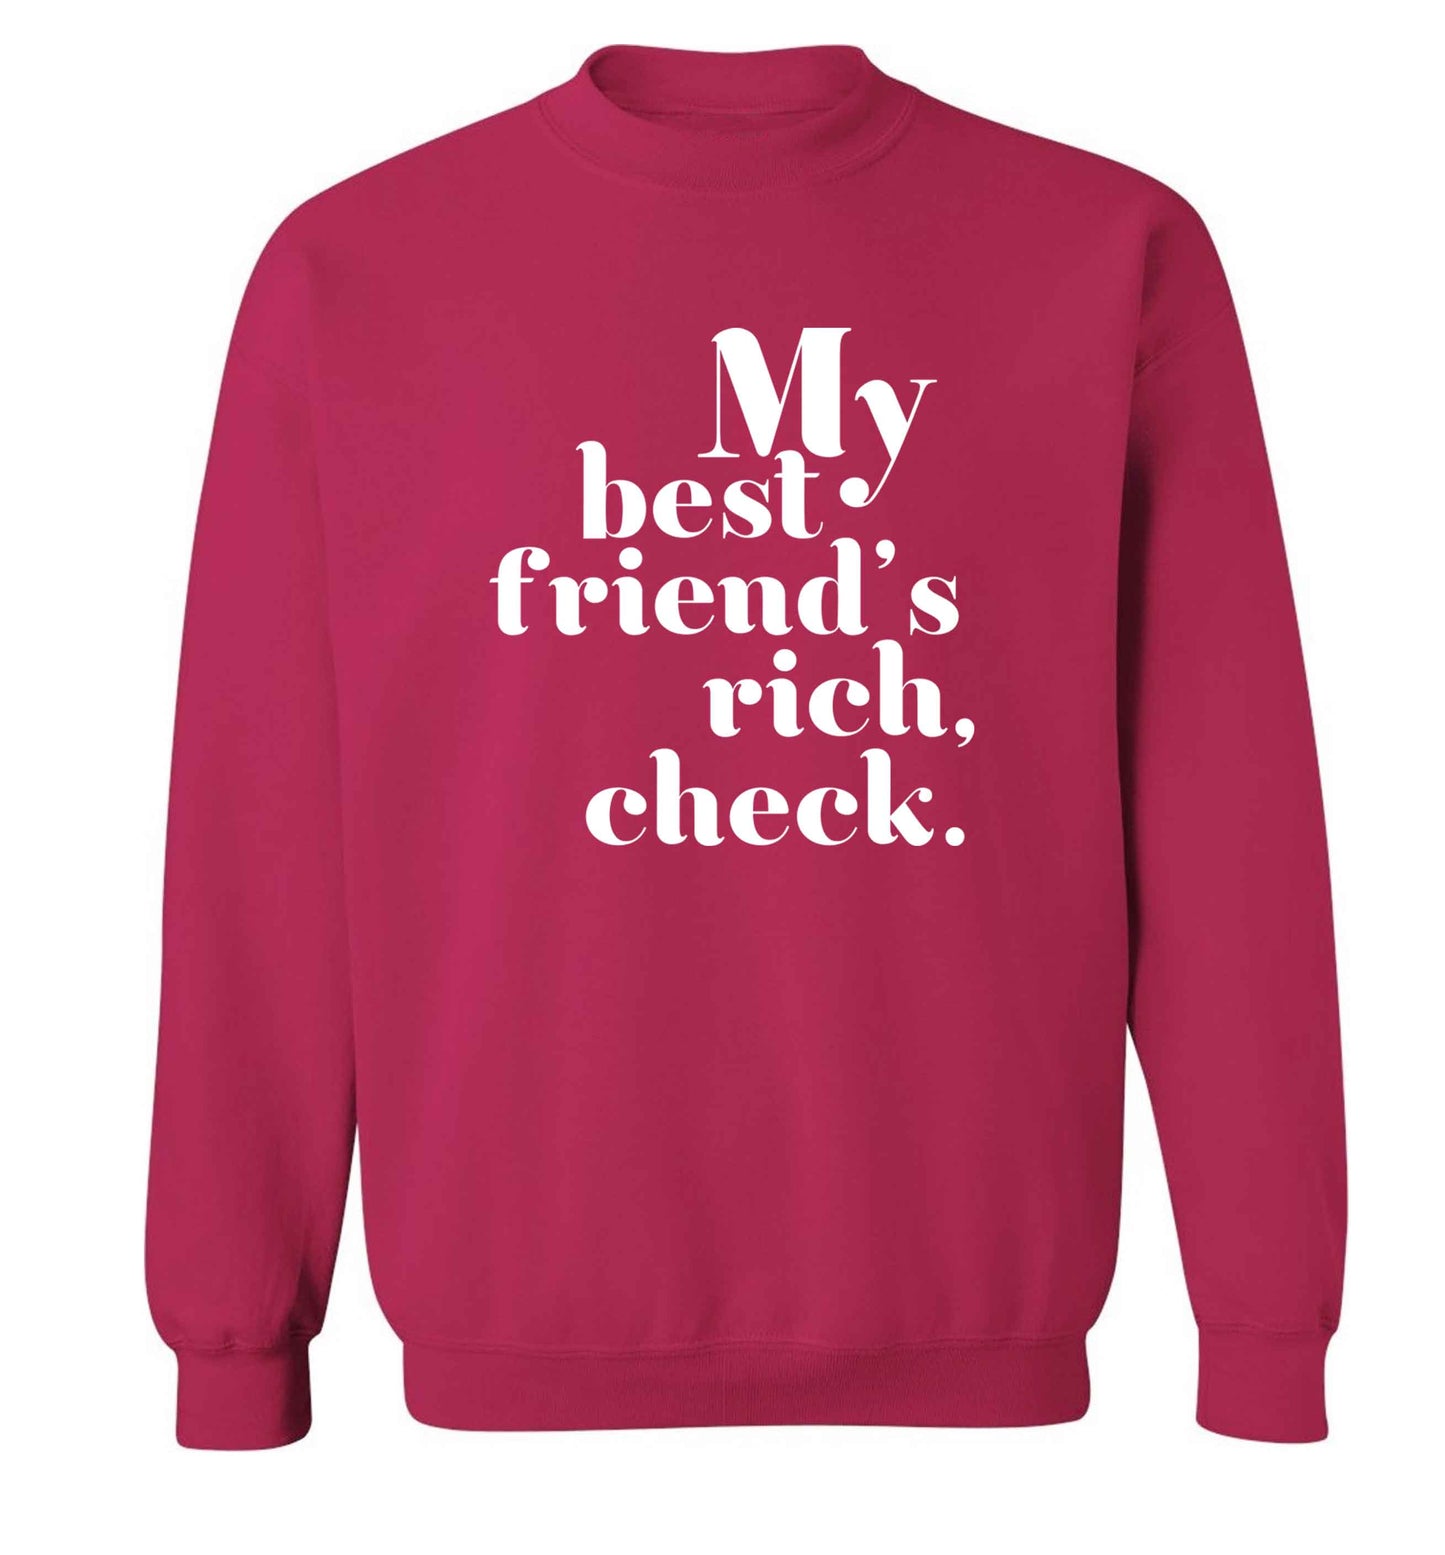 Got a rich best friend? Why not ask them to get you this, just let us  know and we'll tripple the price ;)  adult's unisex pink sweater 2XL